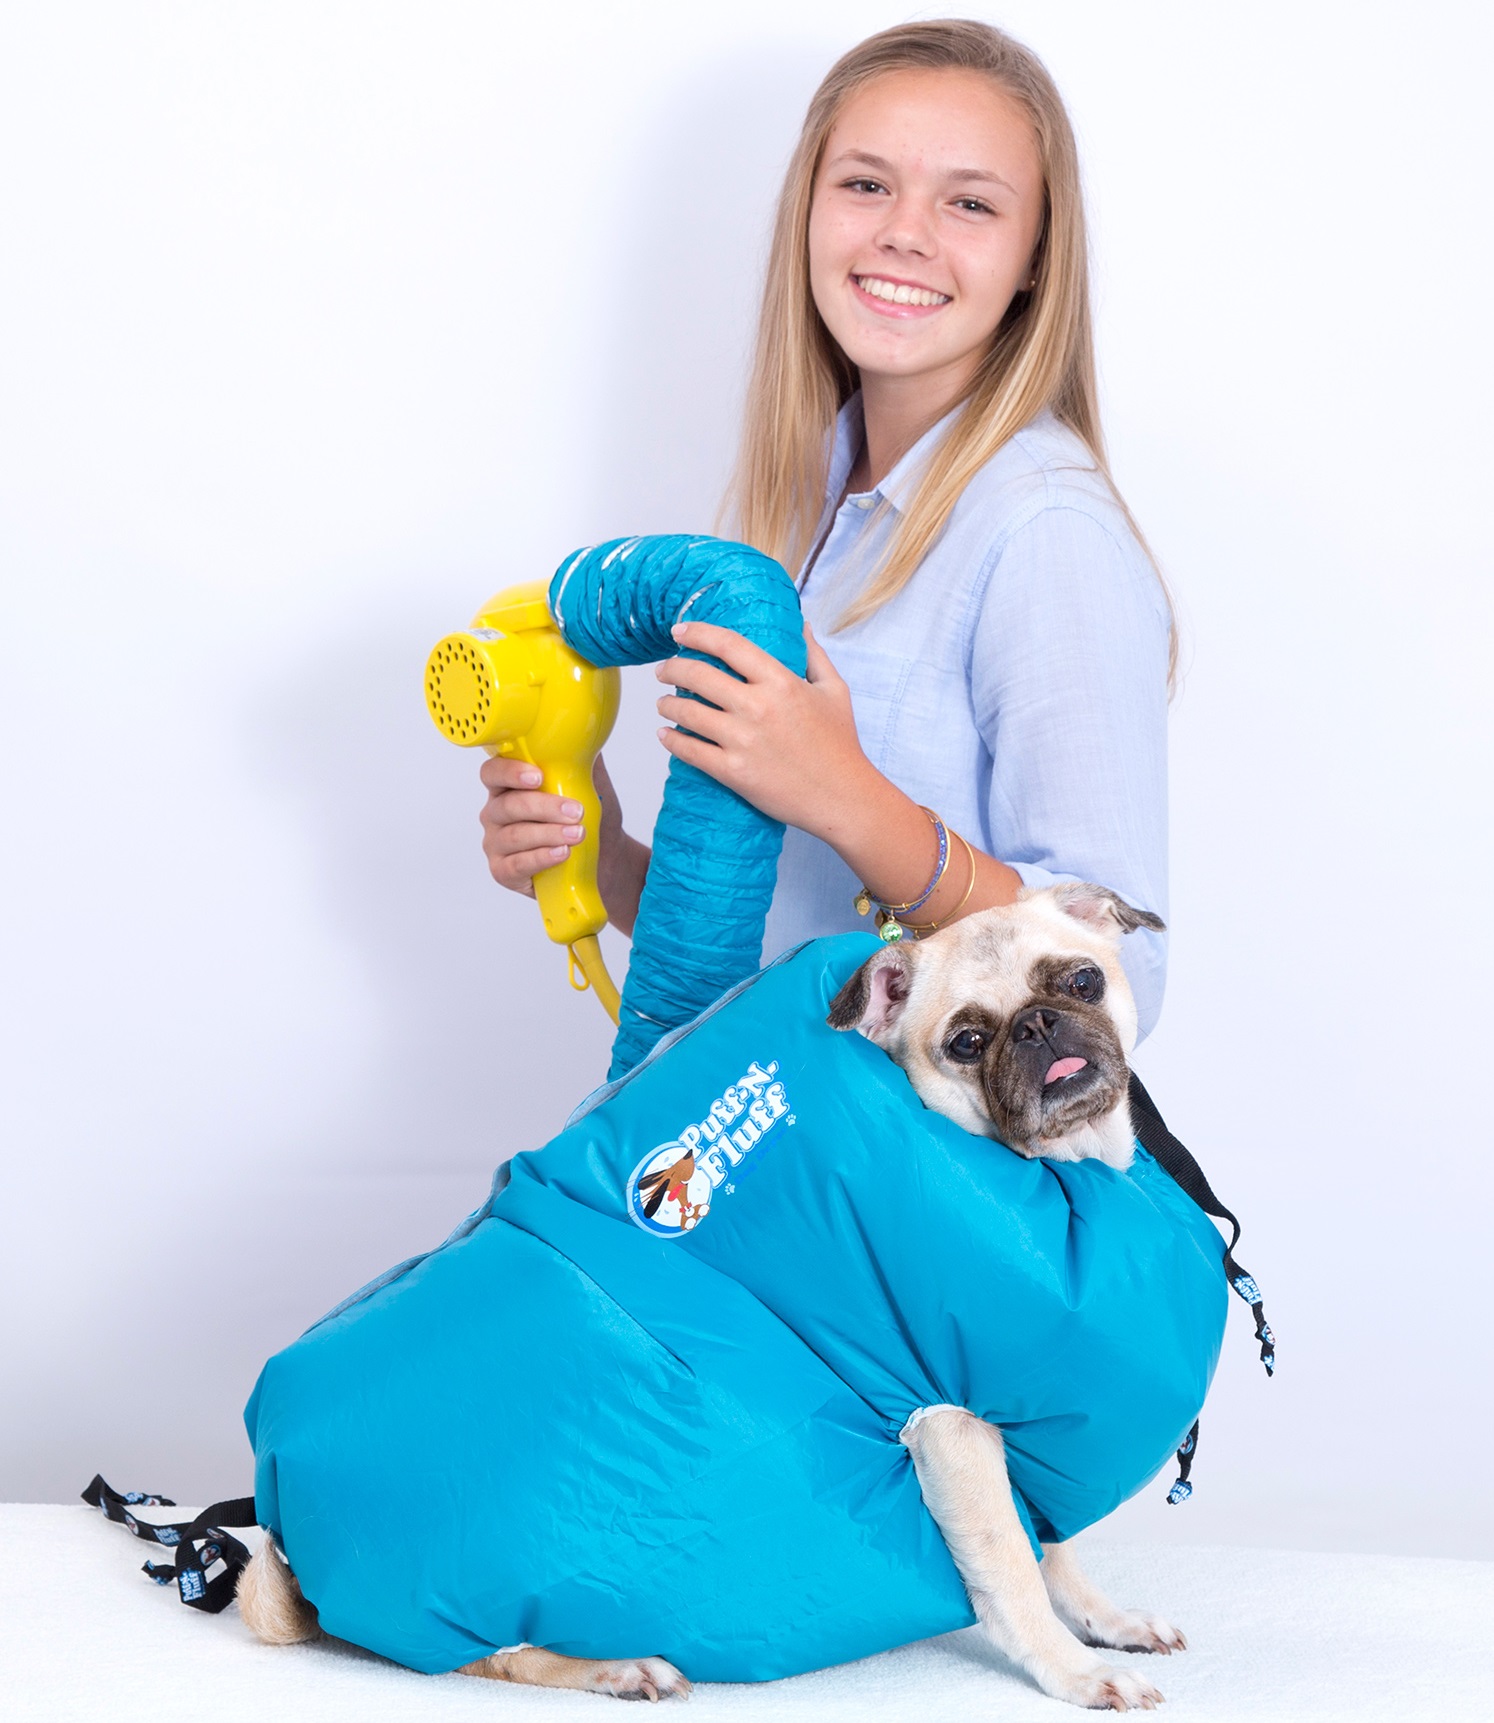 Marissa Streng poses with her dog, who models the Puff-N-Fluff dog dryer.